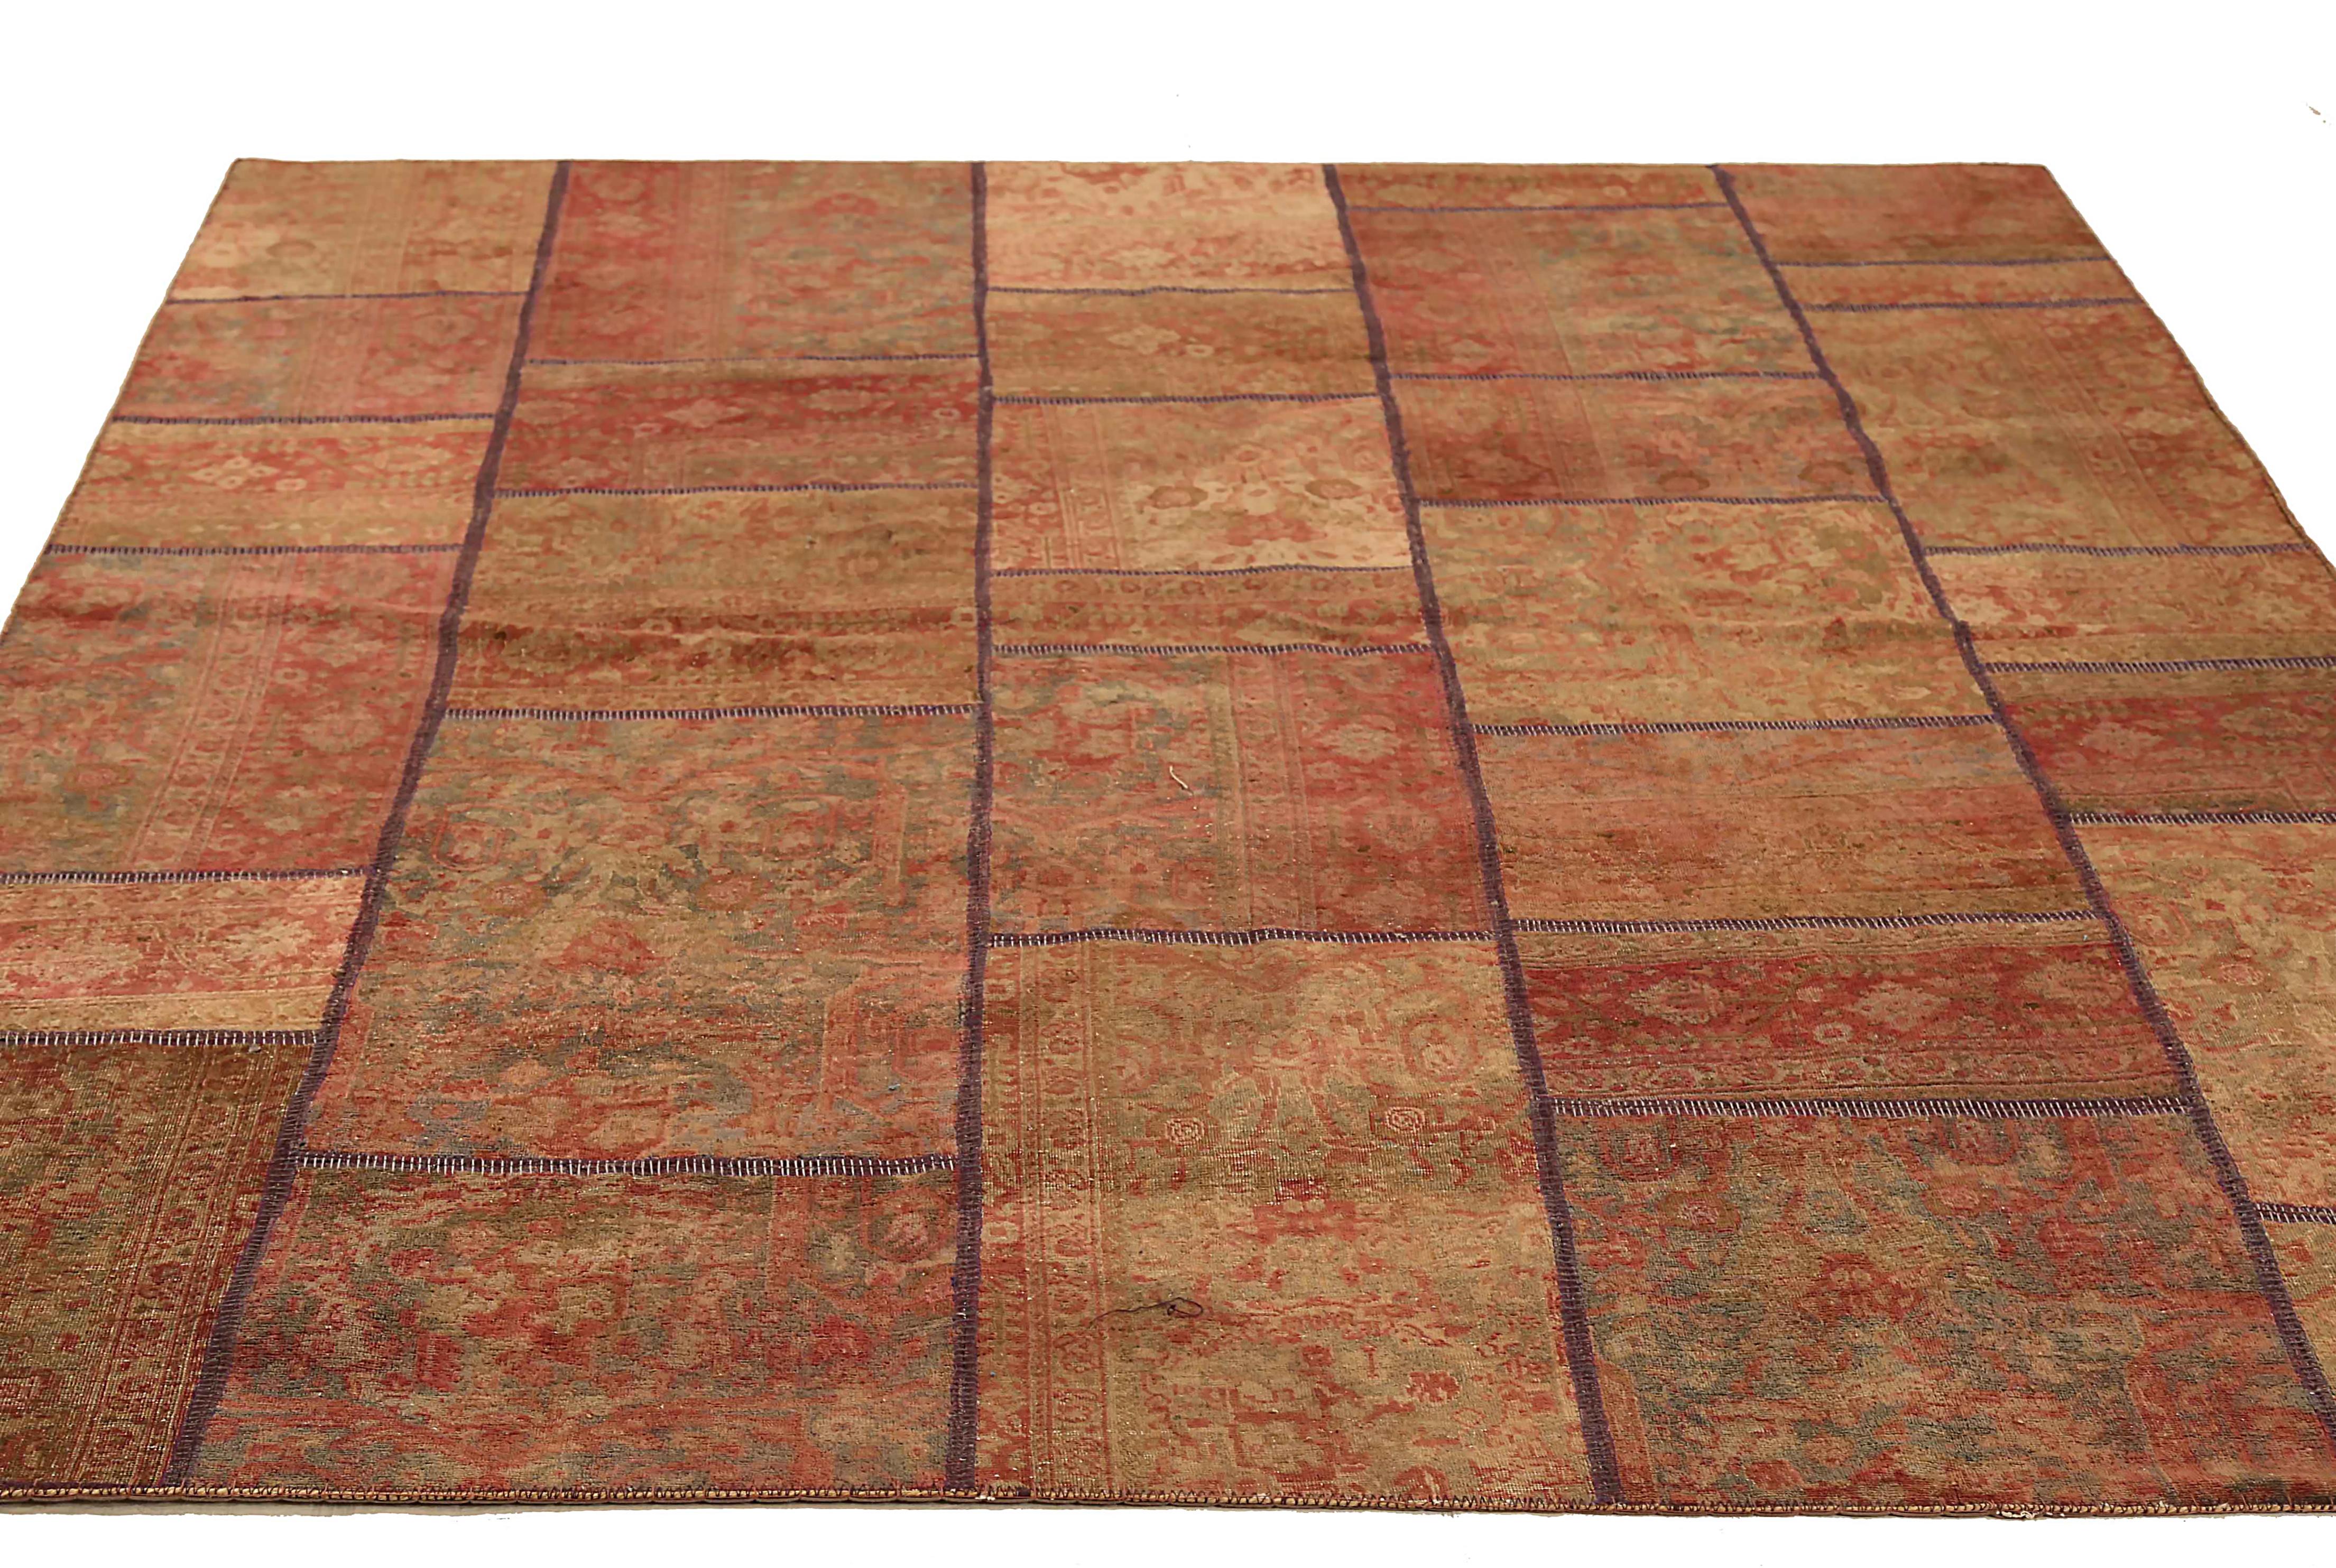 Antique handmade Persian area rug from high quality sheep’s wool and colored with eco-friendly vegetable dyes that are proven safe for humans and pets alike. It’s a Classic Patch Kilim design showcasing a block pattern on a red and brown field with